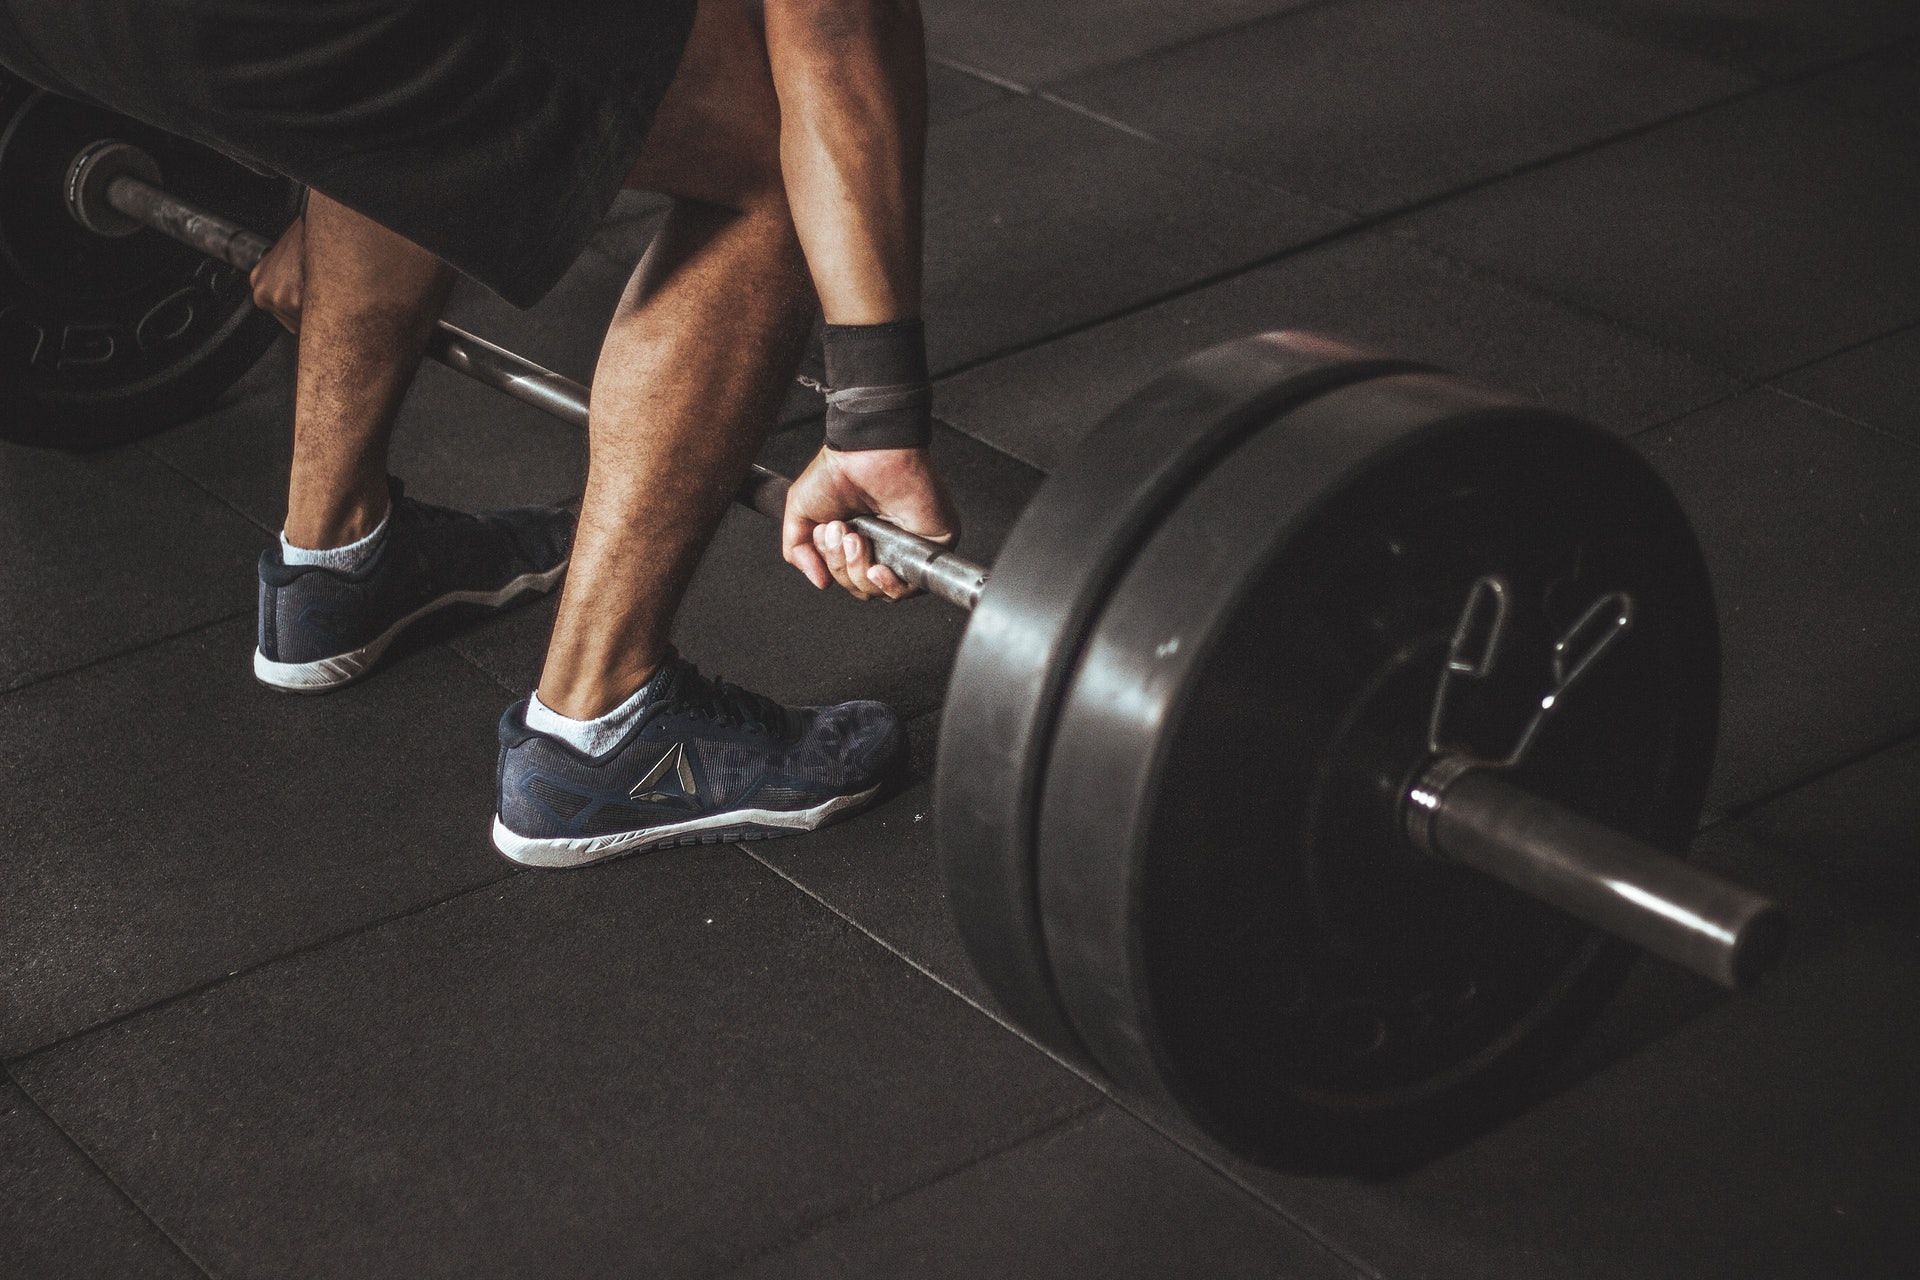 Leg exercises are an important part of a workout routine. (Photo by Victor Freitas via pexels)